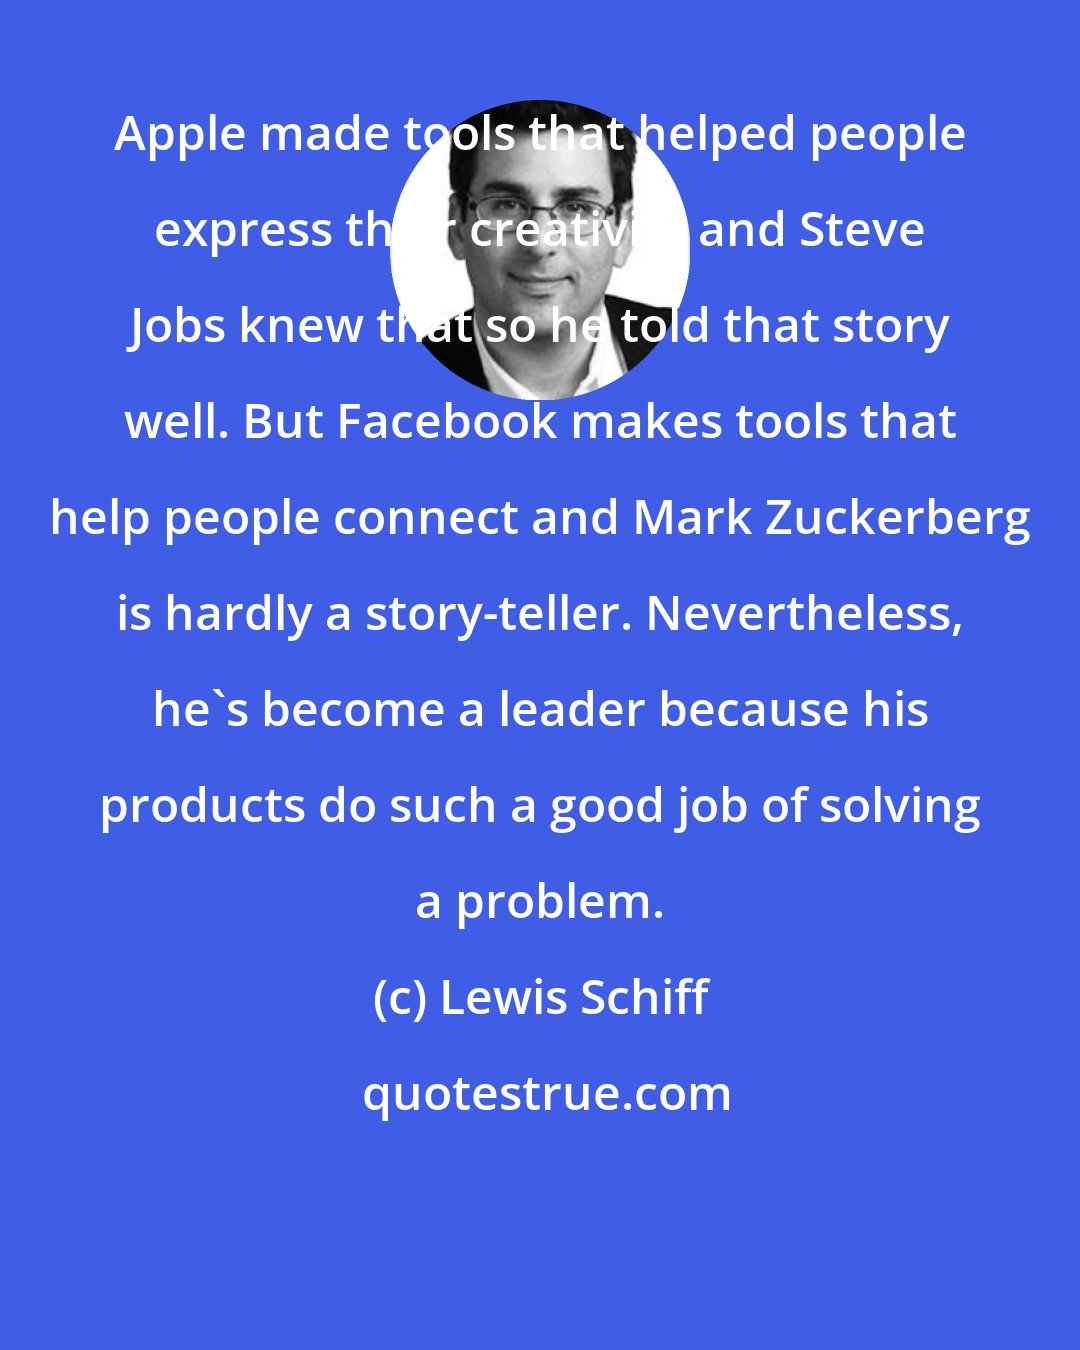 Lewis Schiff: Apple made tools that helped people express their creativity and Steve Jobs knew that so he told that story well. But Facebook makes tools that help people connect and Mark Zuckerberg is hardly a story-teller. Nevertheless, he's become a leader because his products do such a good job of solving a problem.